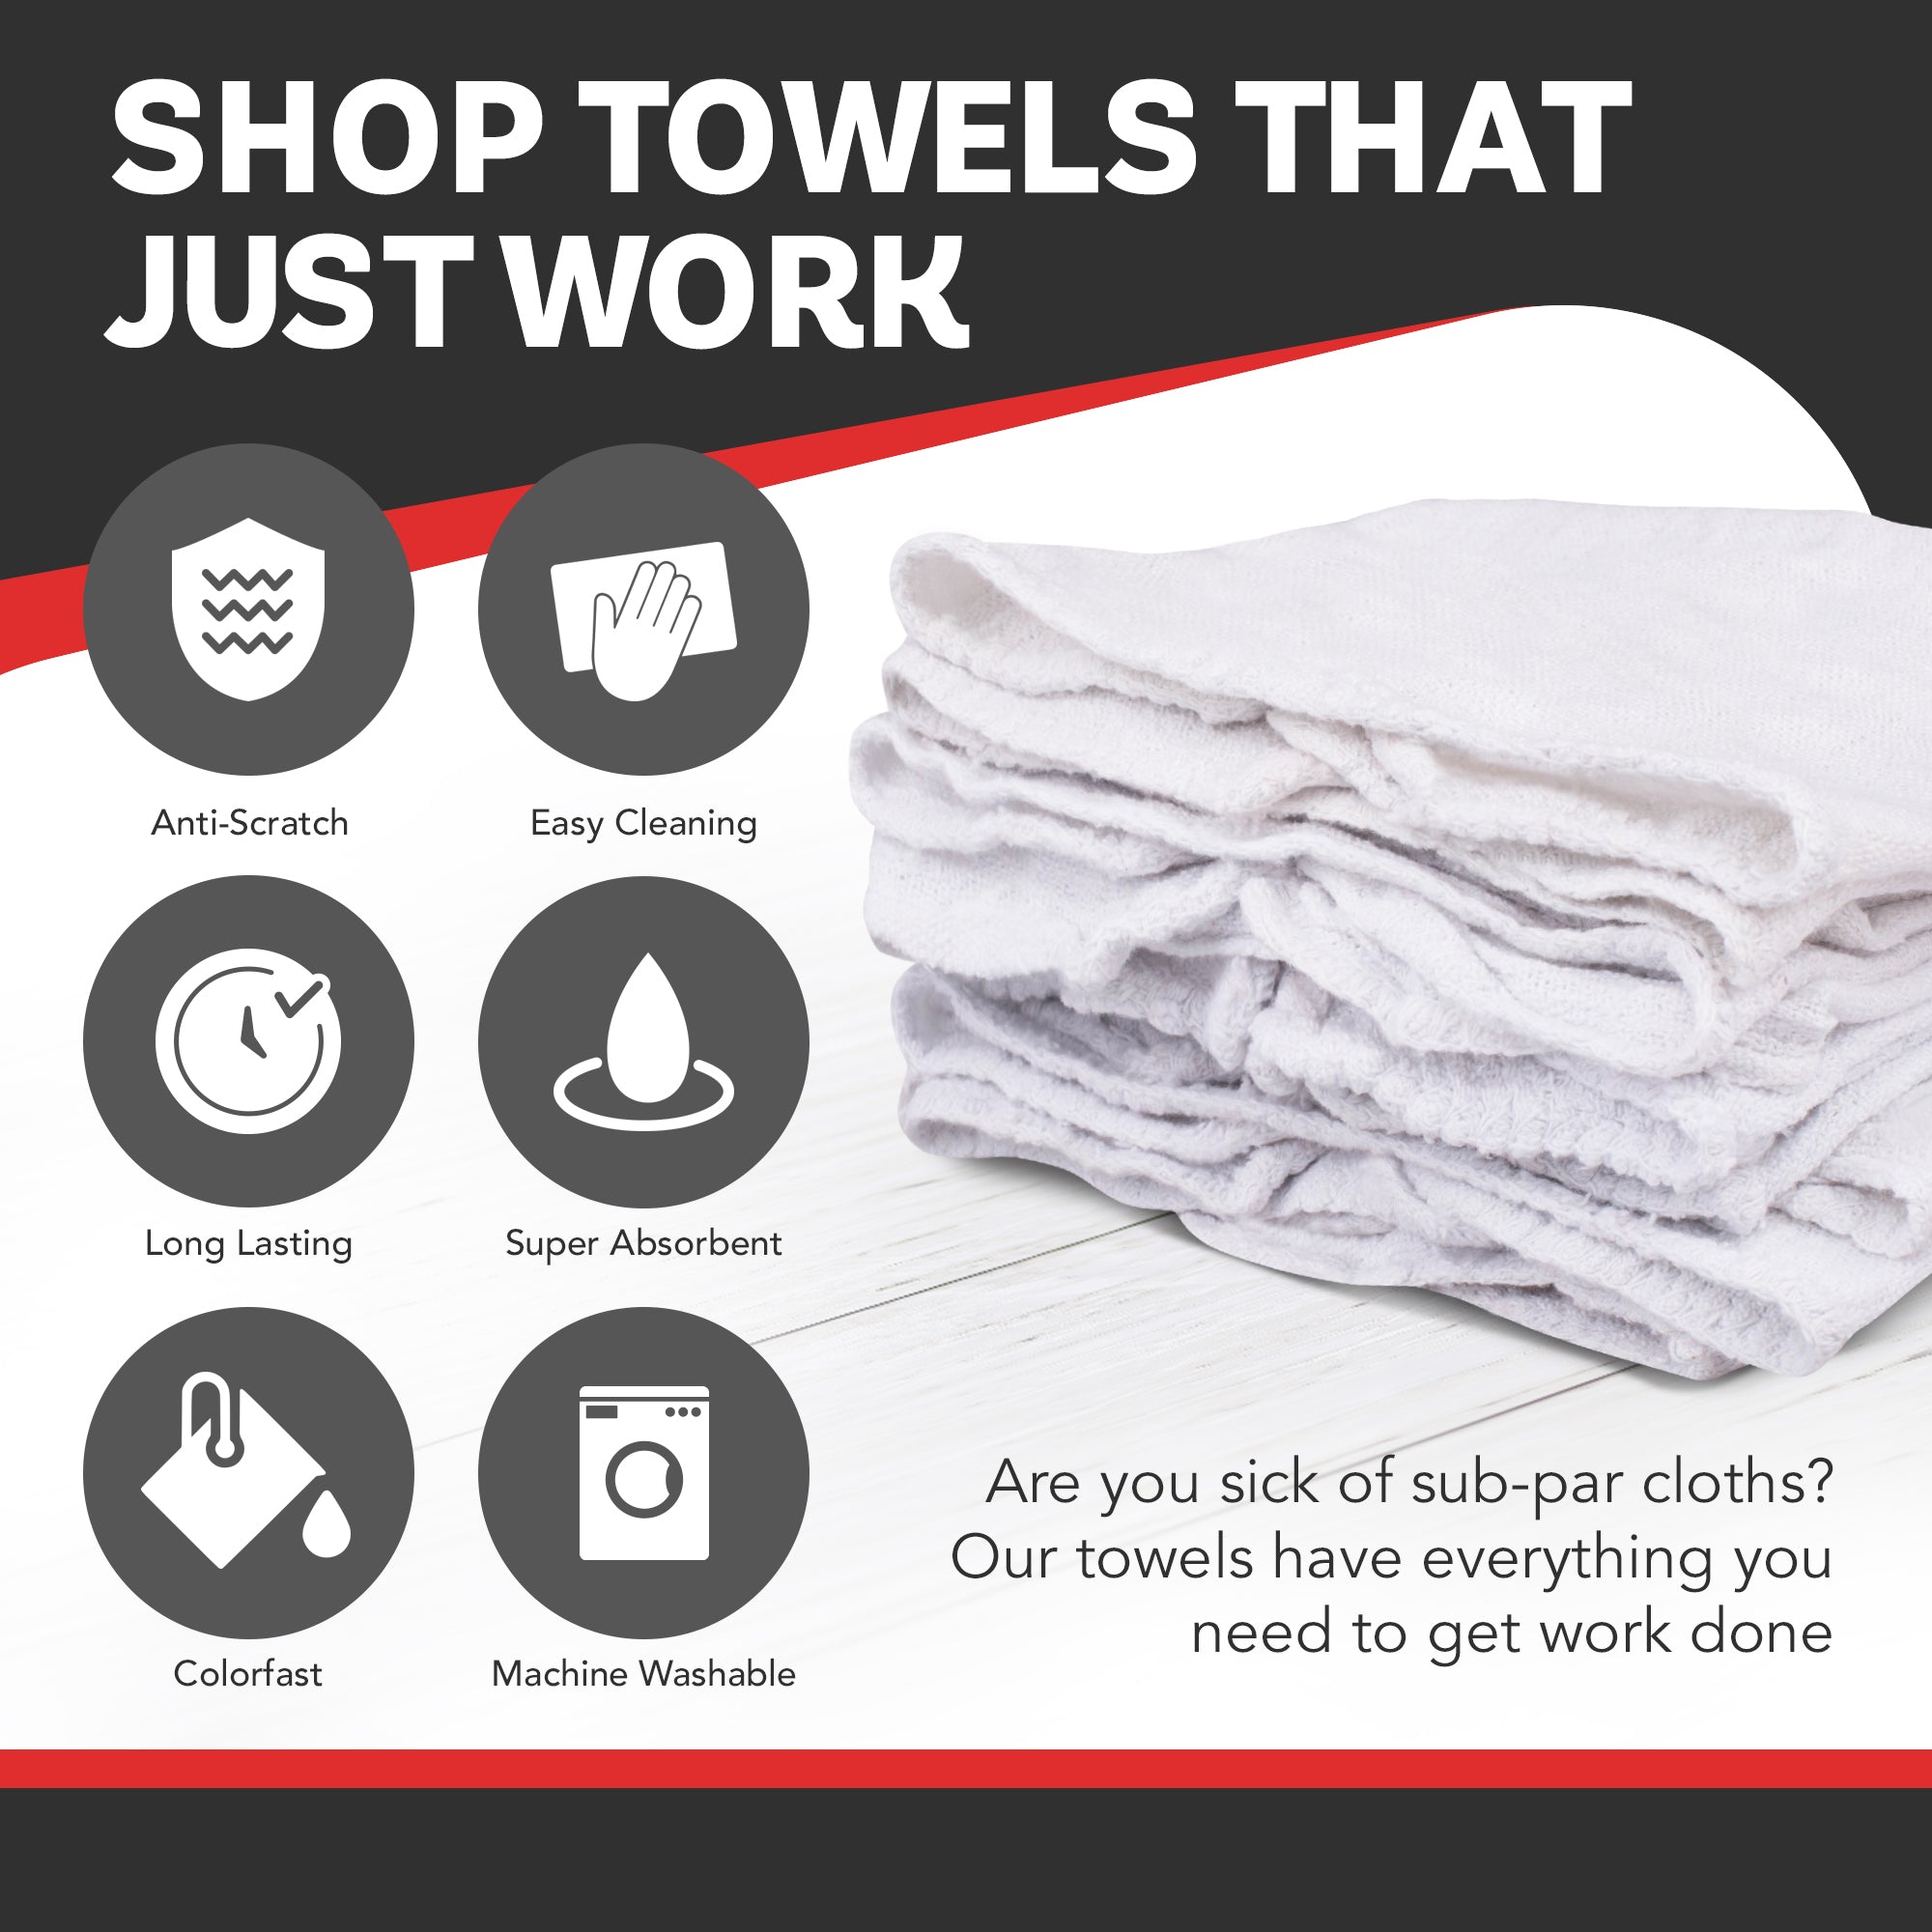 Cotton Homes 500pc Shop Towels Rags Bulk 12 x12 inch- Regenerated Cotton Multipurpose Cleaning Towels, Industrial Wiping Cloth, Paint Cloth, Bar